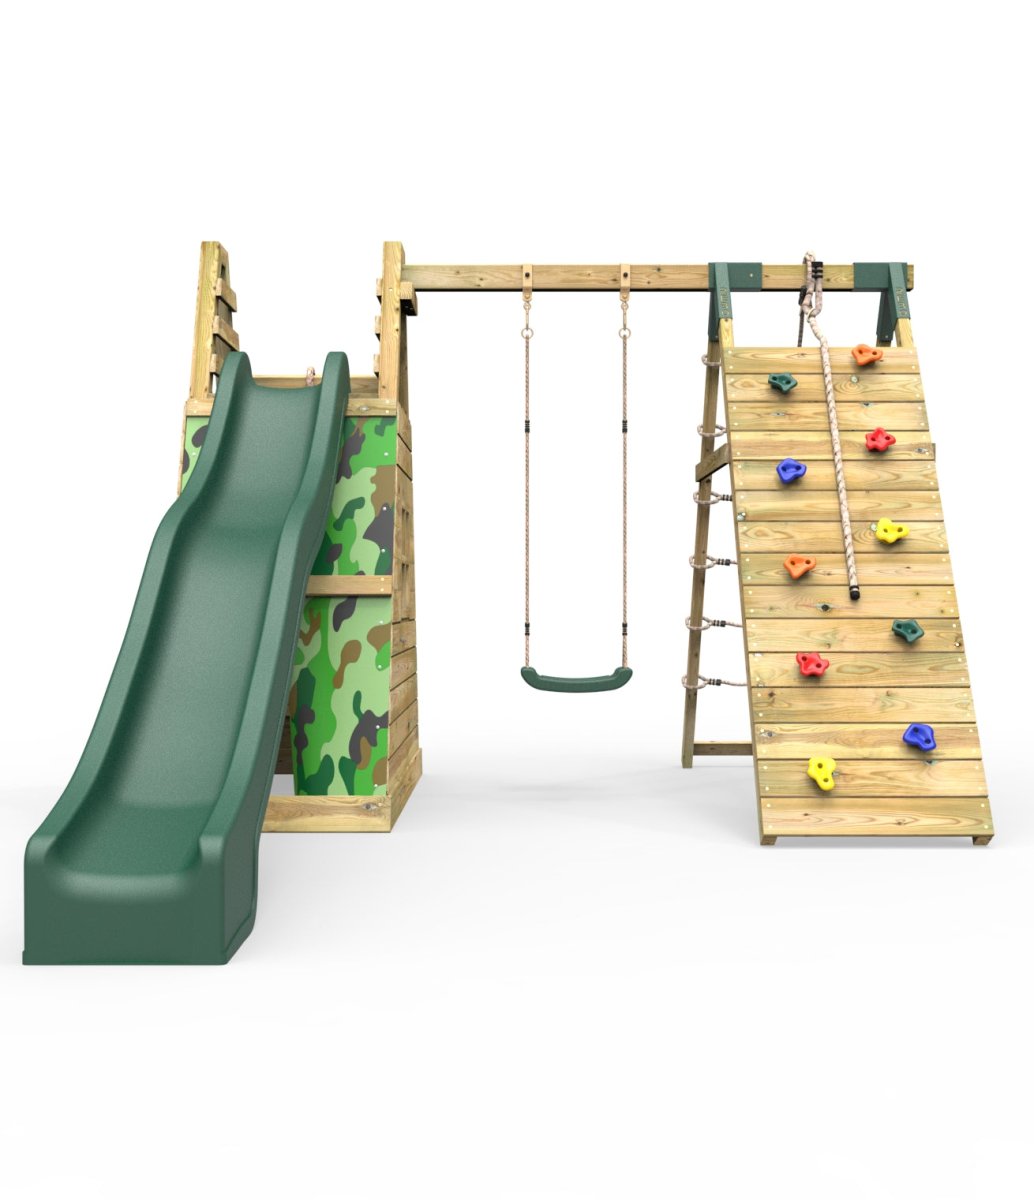 Rebo Wooden Pyramid Climbing Frame with Swings & 10ft Water Slide - Mystic